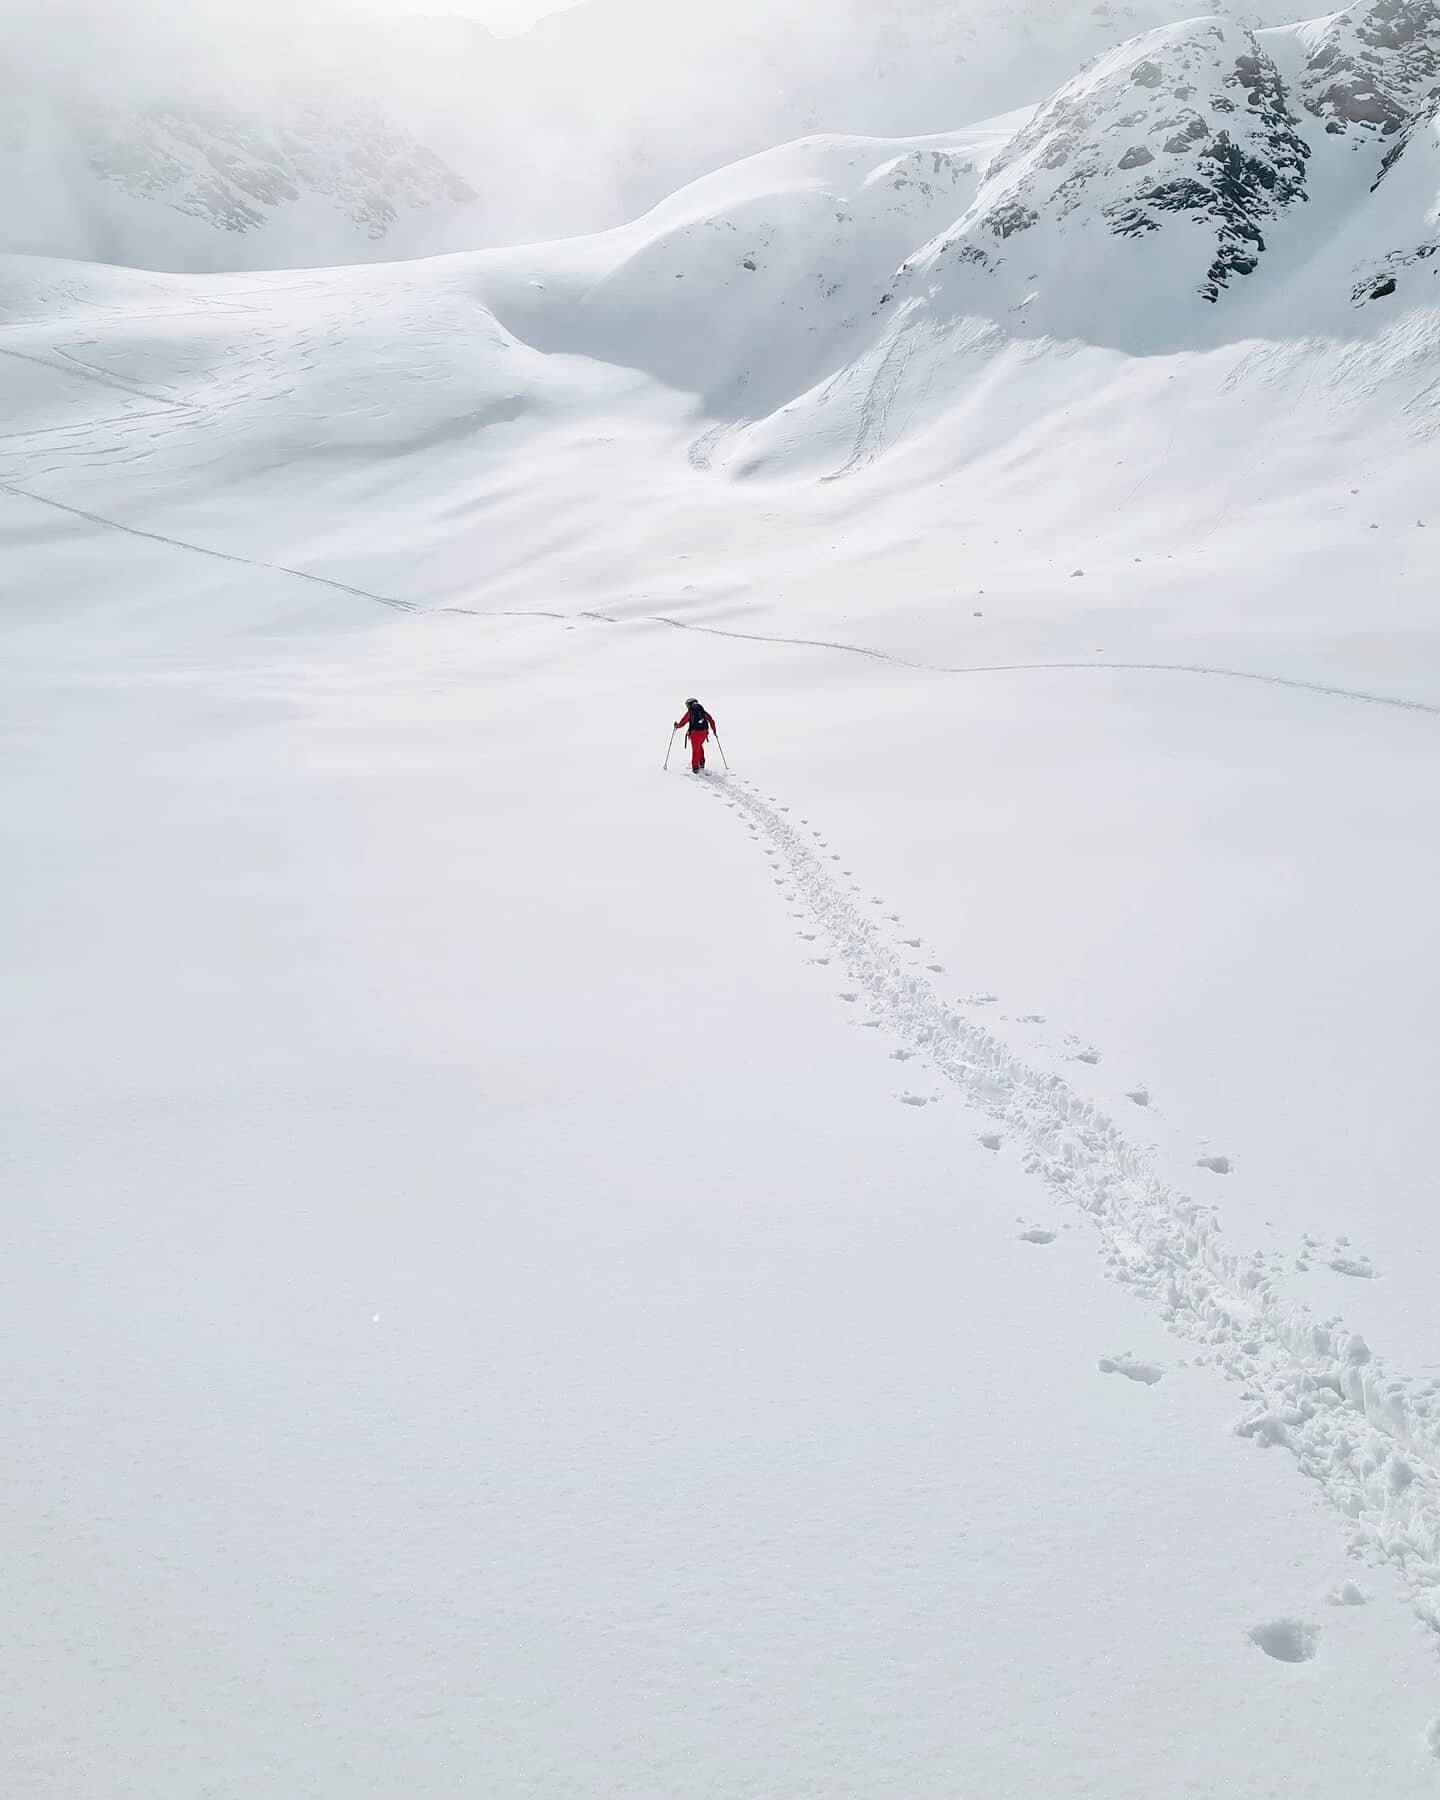 Got a couple more winter adventures planned and then we're finally back to hiking season. Can't wait to get back on trail.

@suseheinz forging her own path ✊ 

#womenwhowander #womenwhowandercollective #skitouring #mountainlove #mountains #switzerlan